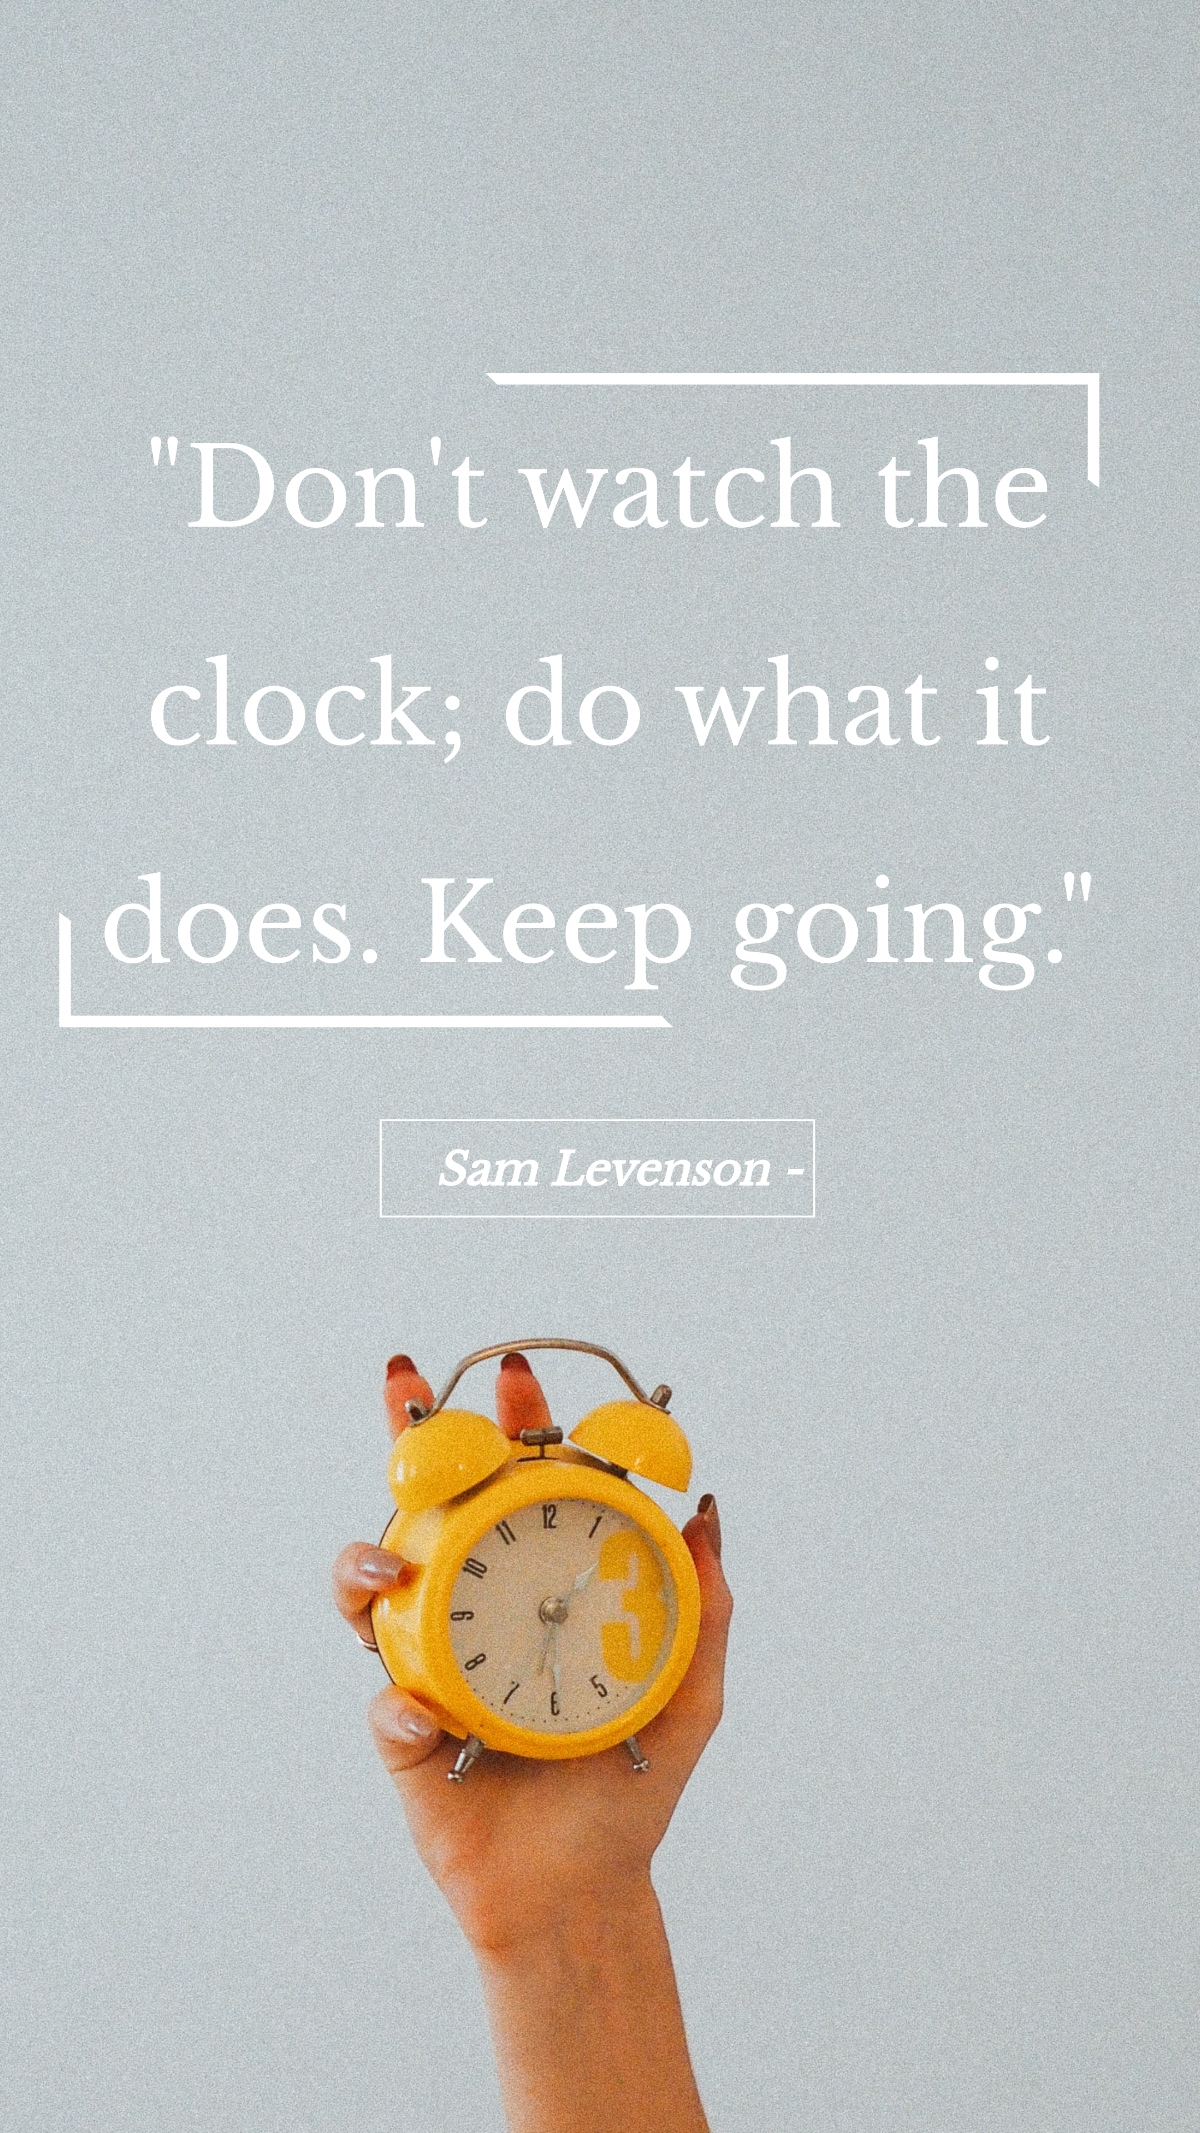 Free Sam Levenson - Don't watch the clock; do what it does. Keep going. Template